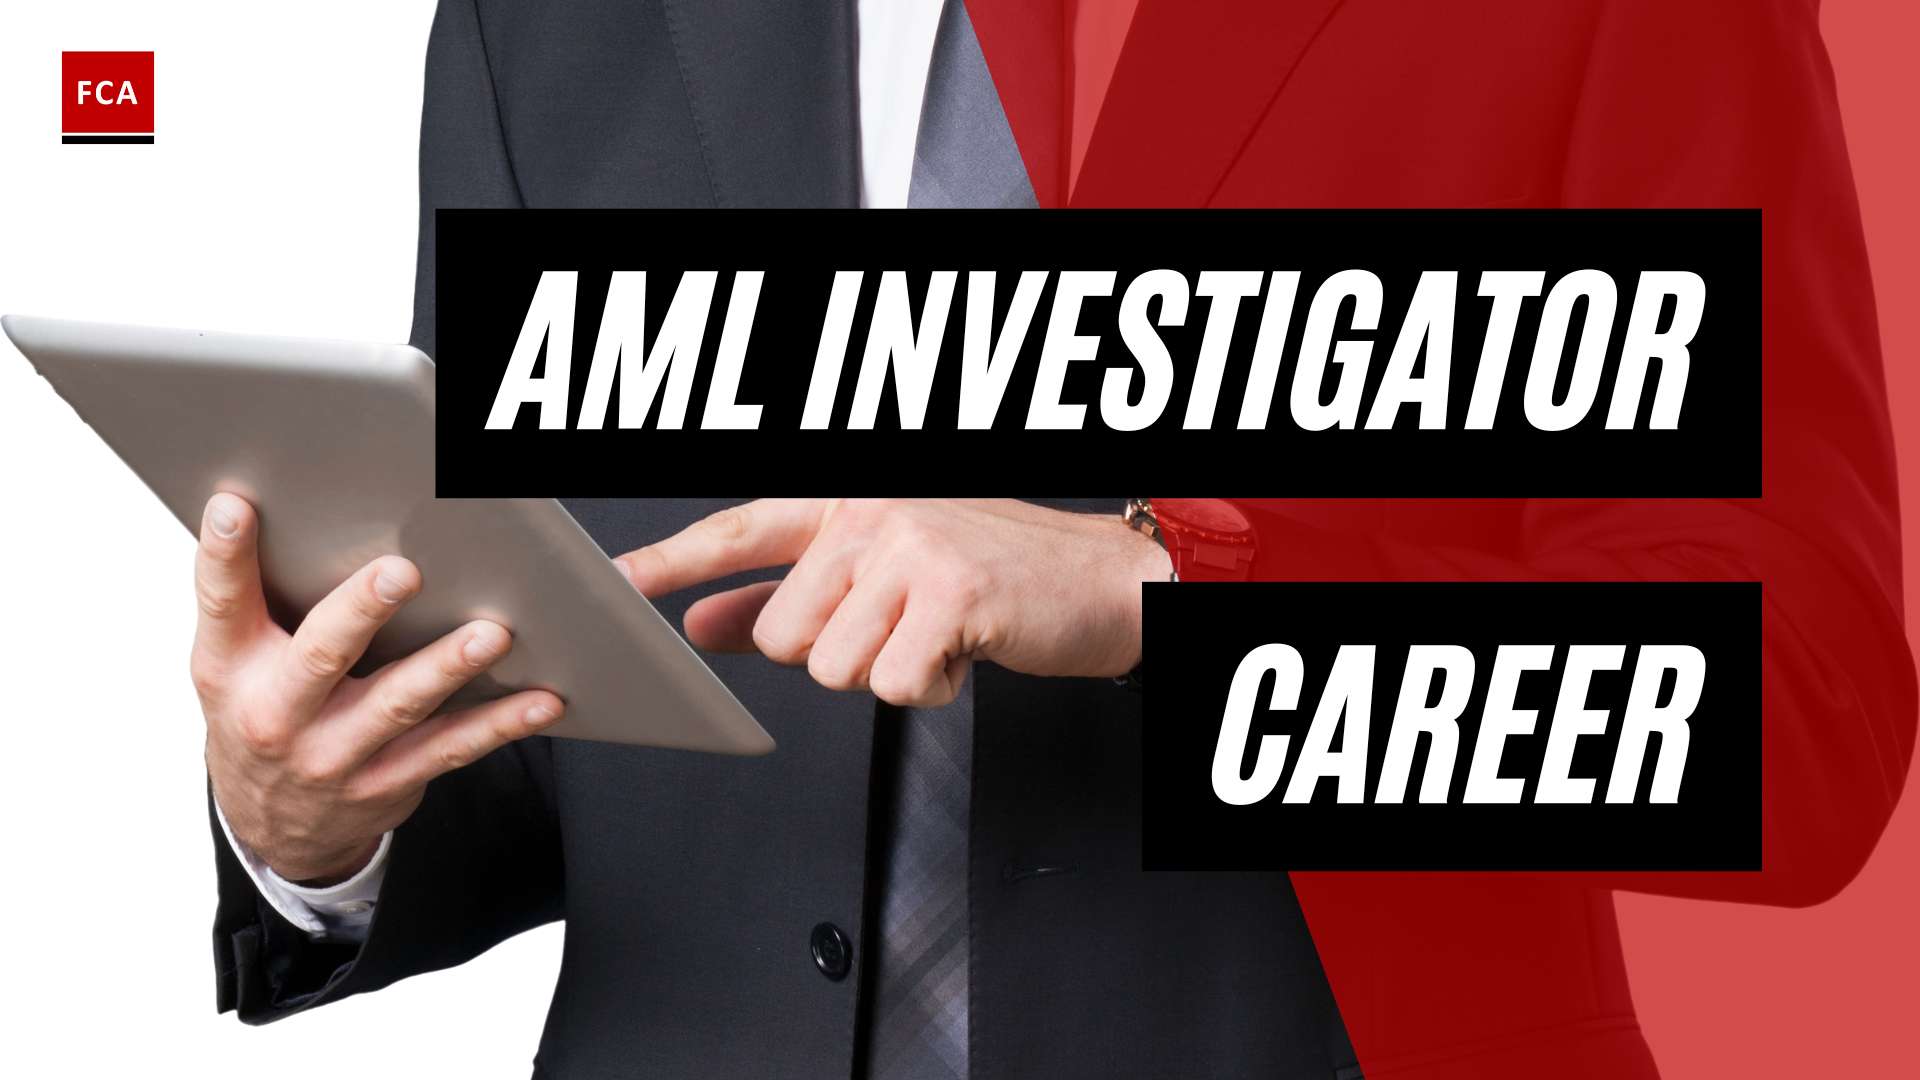 Cracking The Code: A Closer Look At The Aml Investigator Career